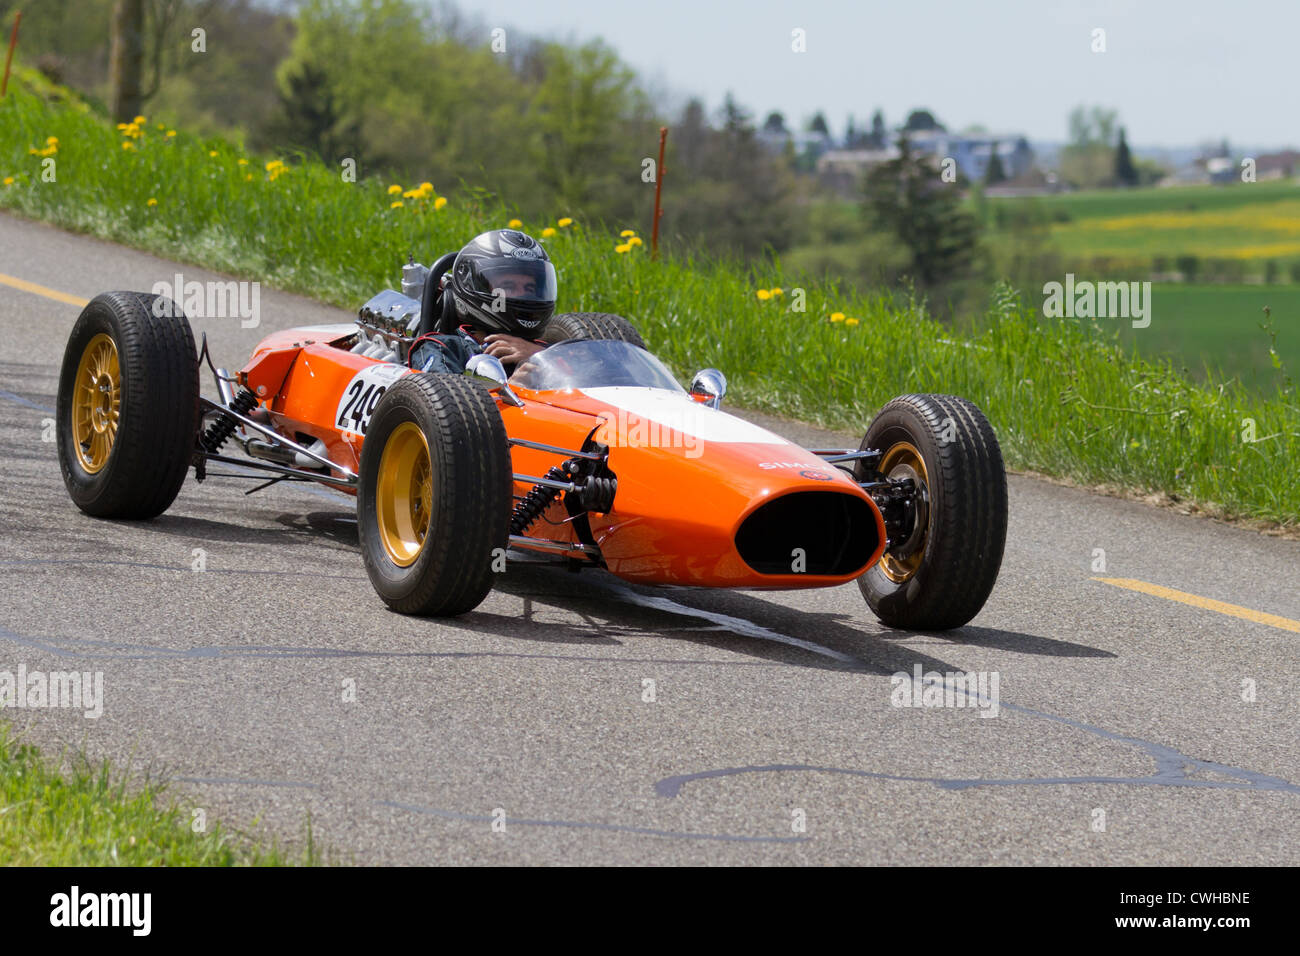 Vintage race car Hirzel P17 Formel 3 from 1965 at Grand Prix in Mutschellen, SUI on April 29, 2012. Stock Photo